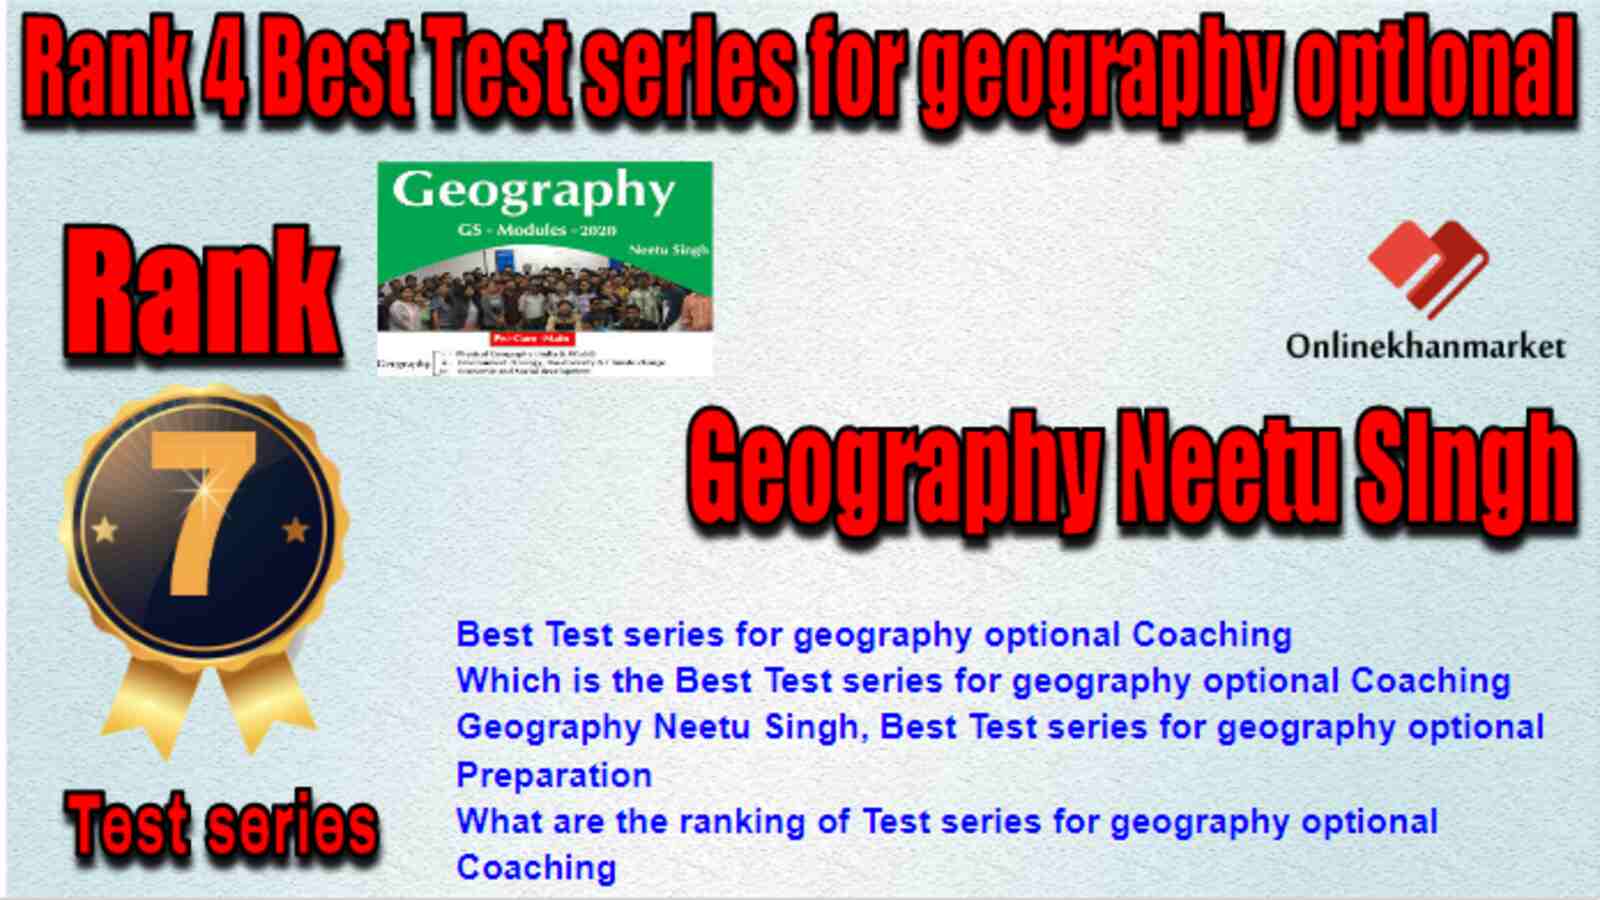 Rank 7 Best Test series for geography optional